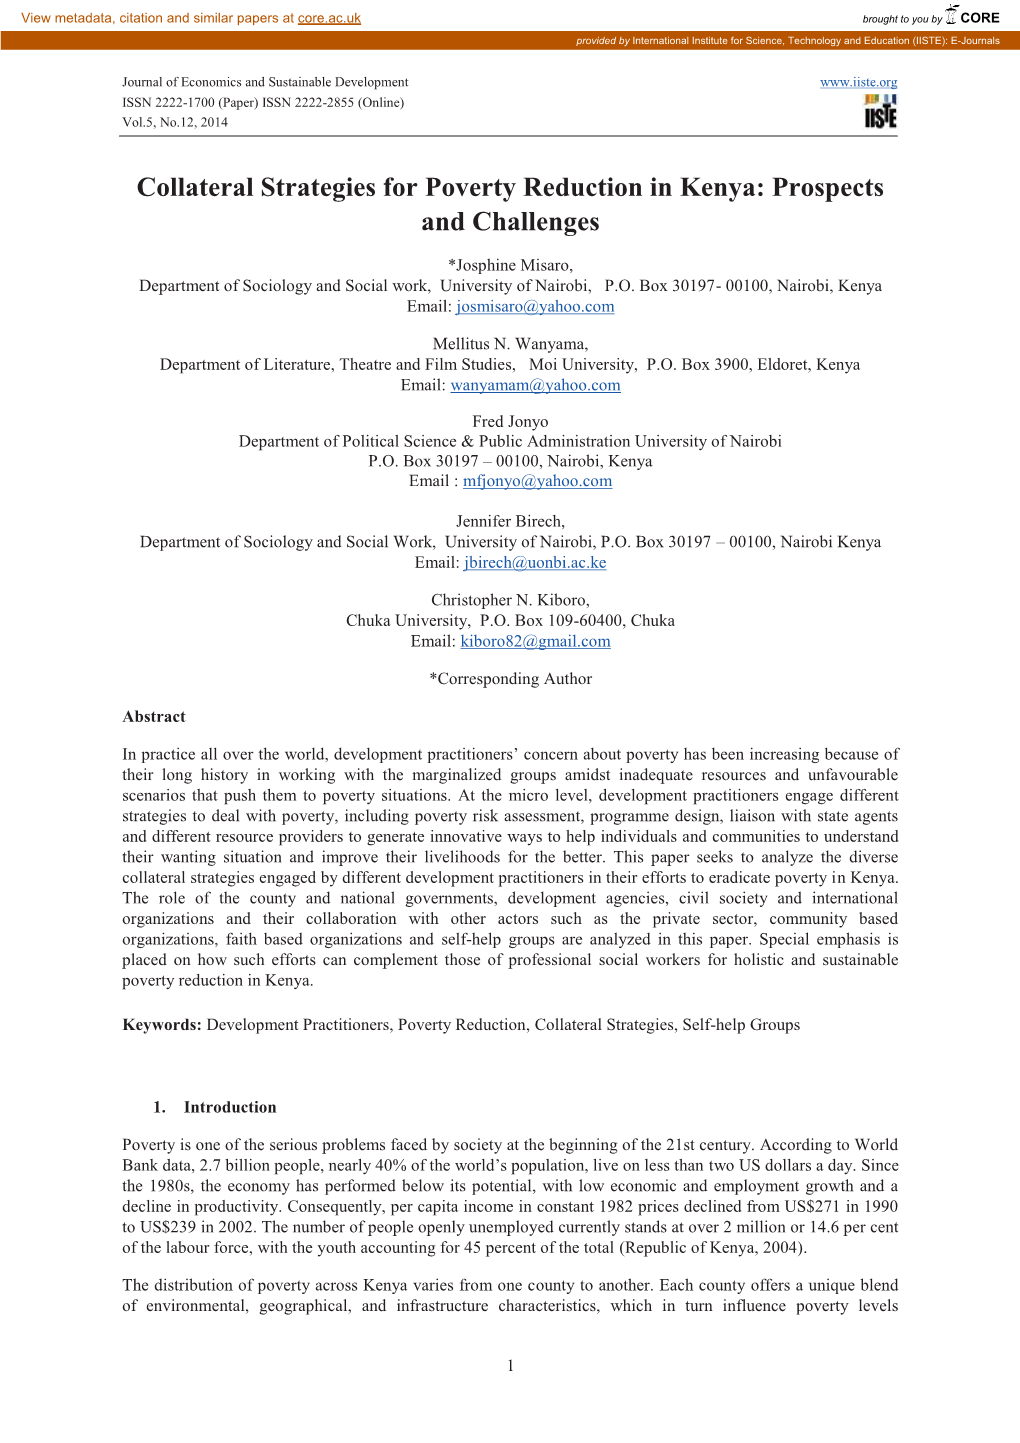 Collateral Strategies for Poverty Reduction in Kenya: Prospects and Challenges